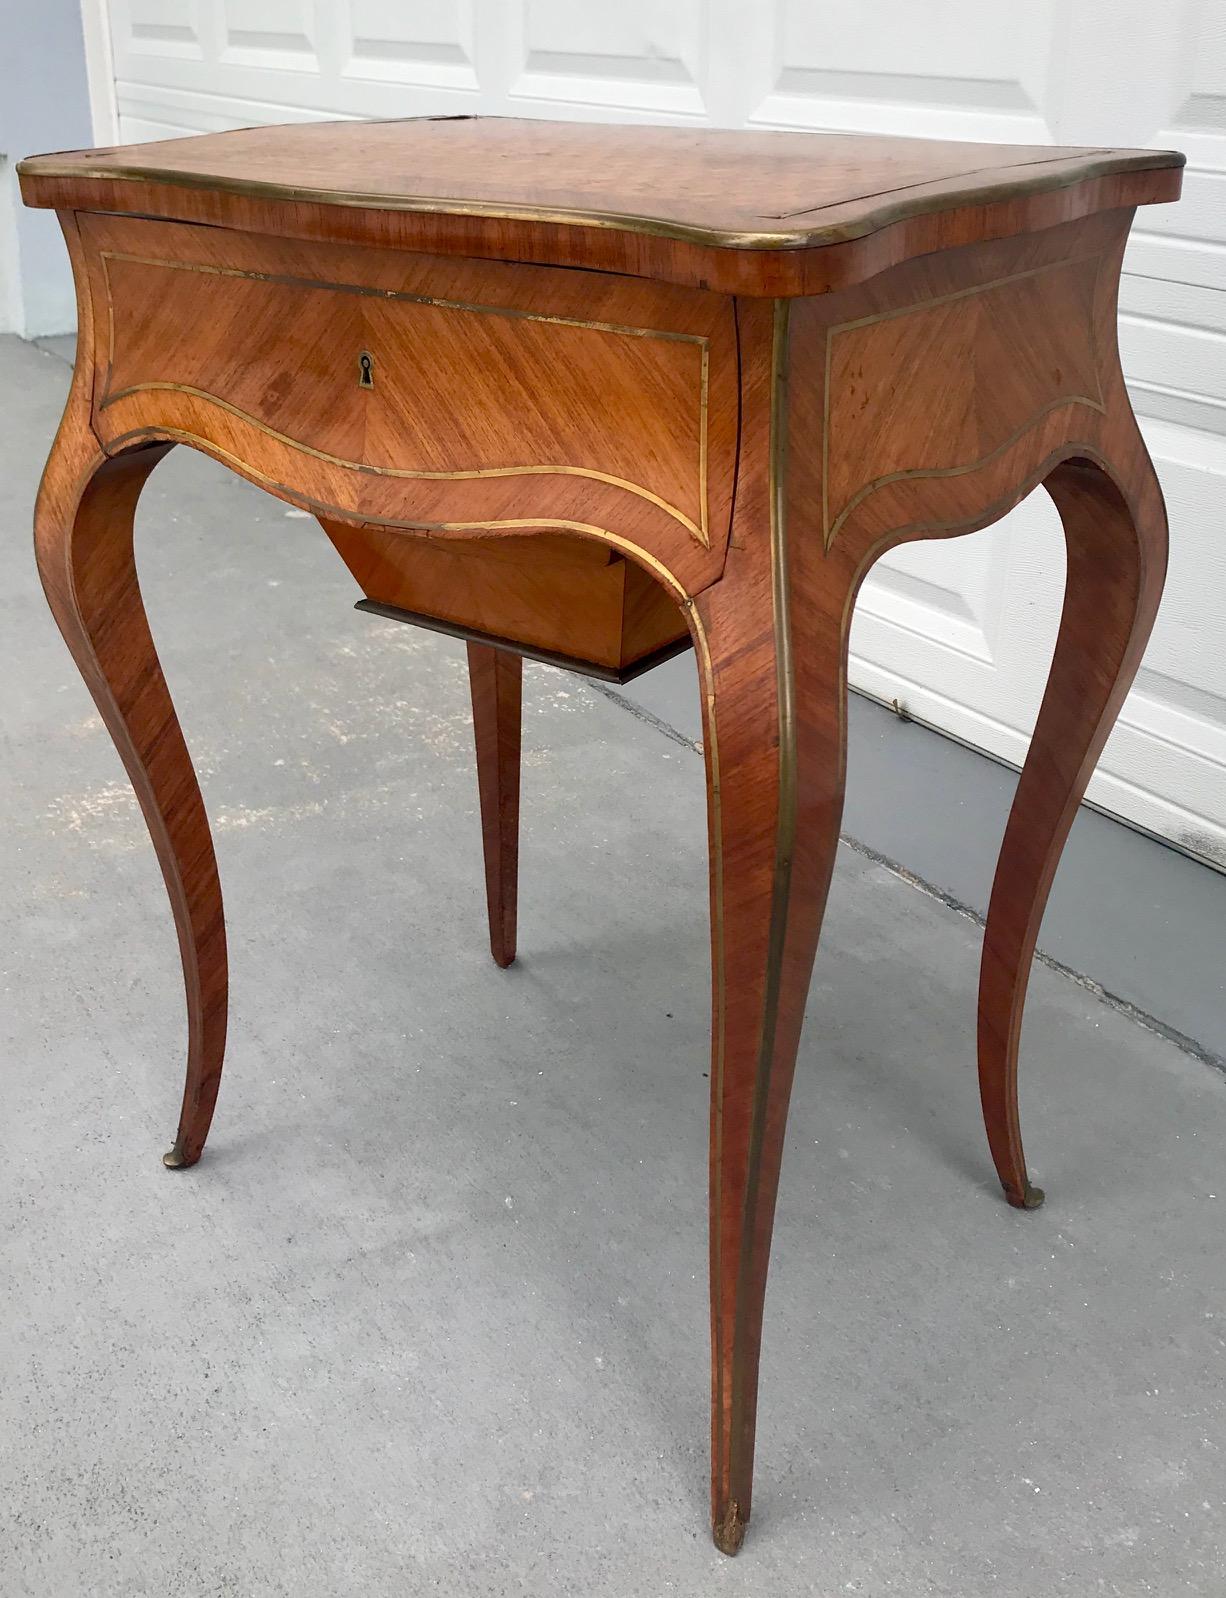 19th Century Louis XV Style Tulipwood Parquetry Sewing Table For Sale 1